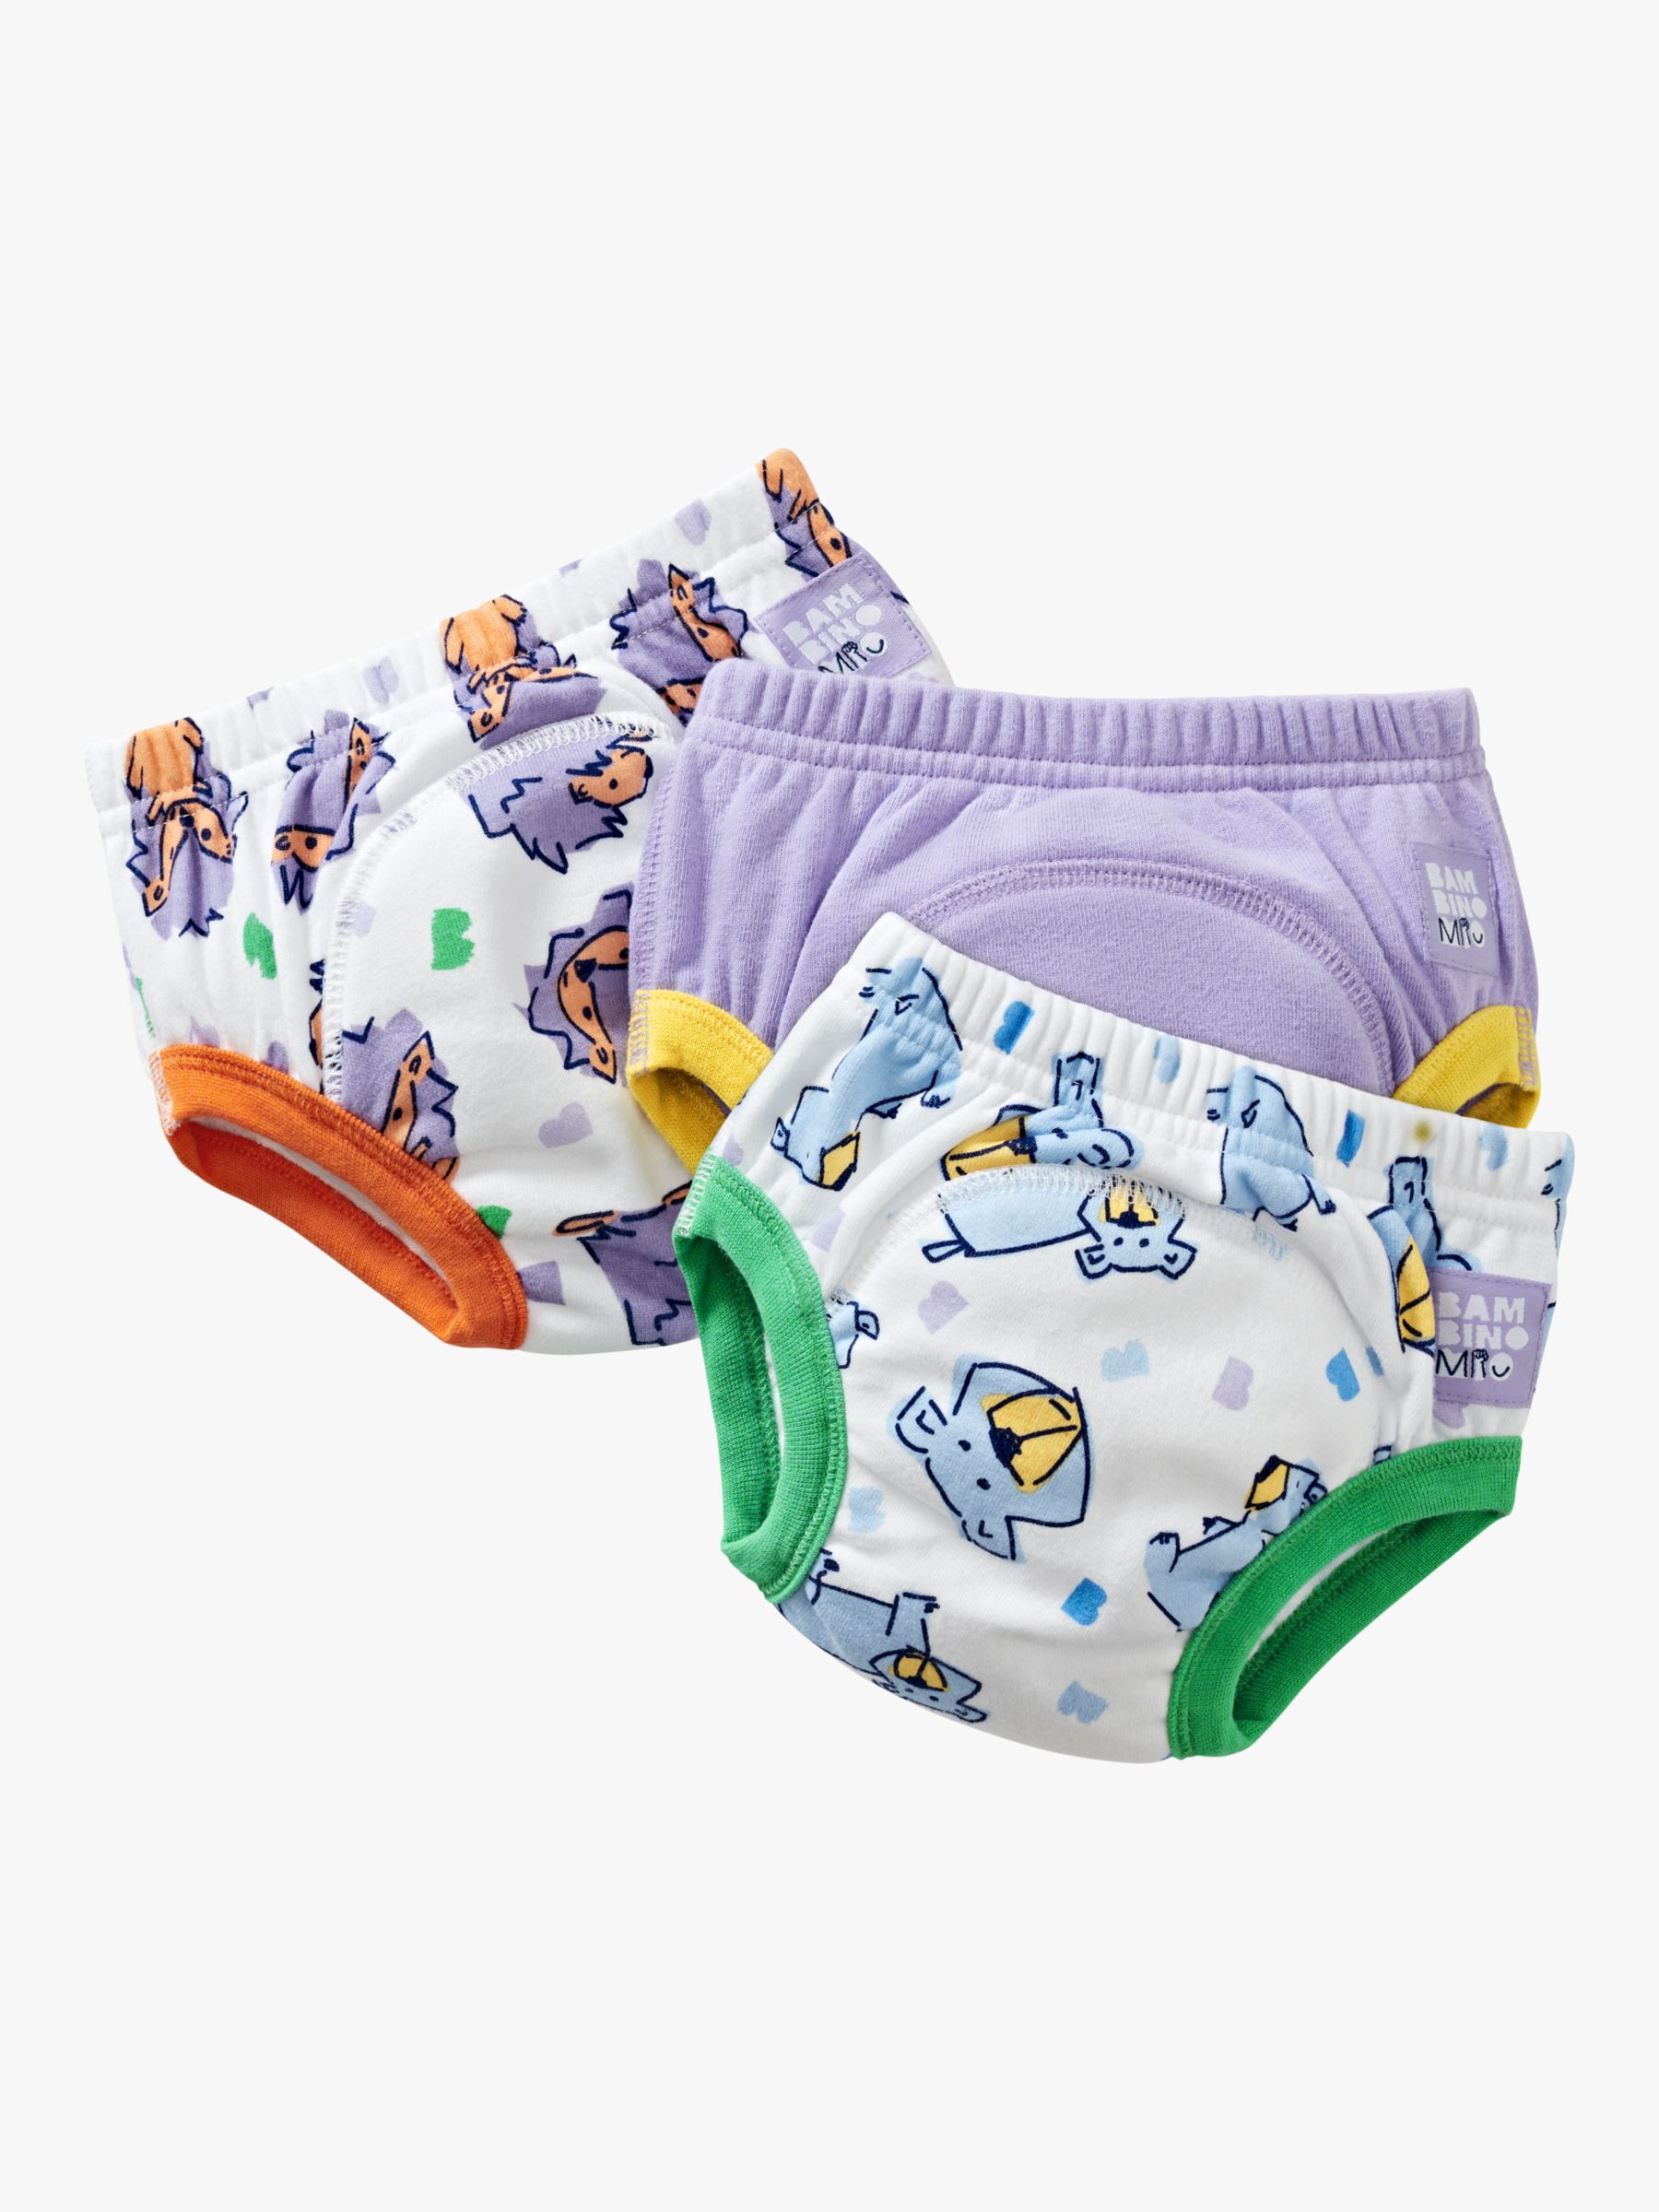  Bambino mio, Potty Training Underwear for Girls and Boys, 18-24  Months, 5 Pack : Baby